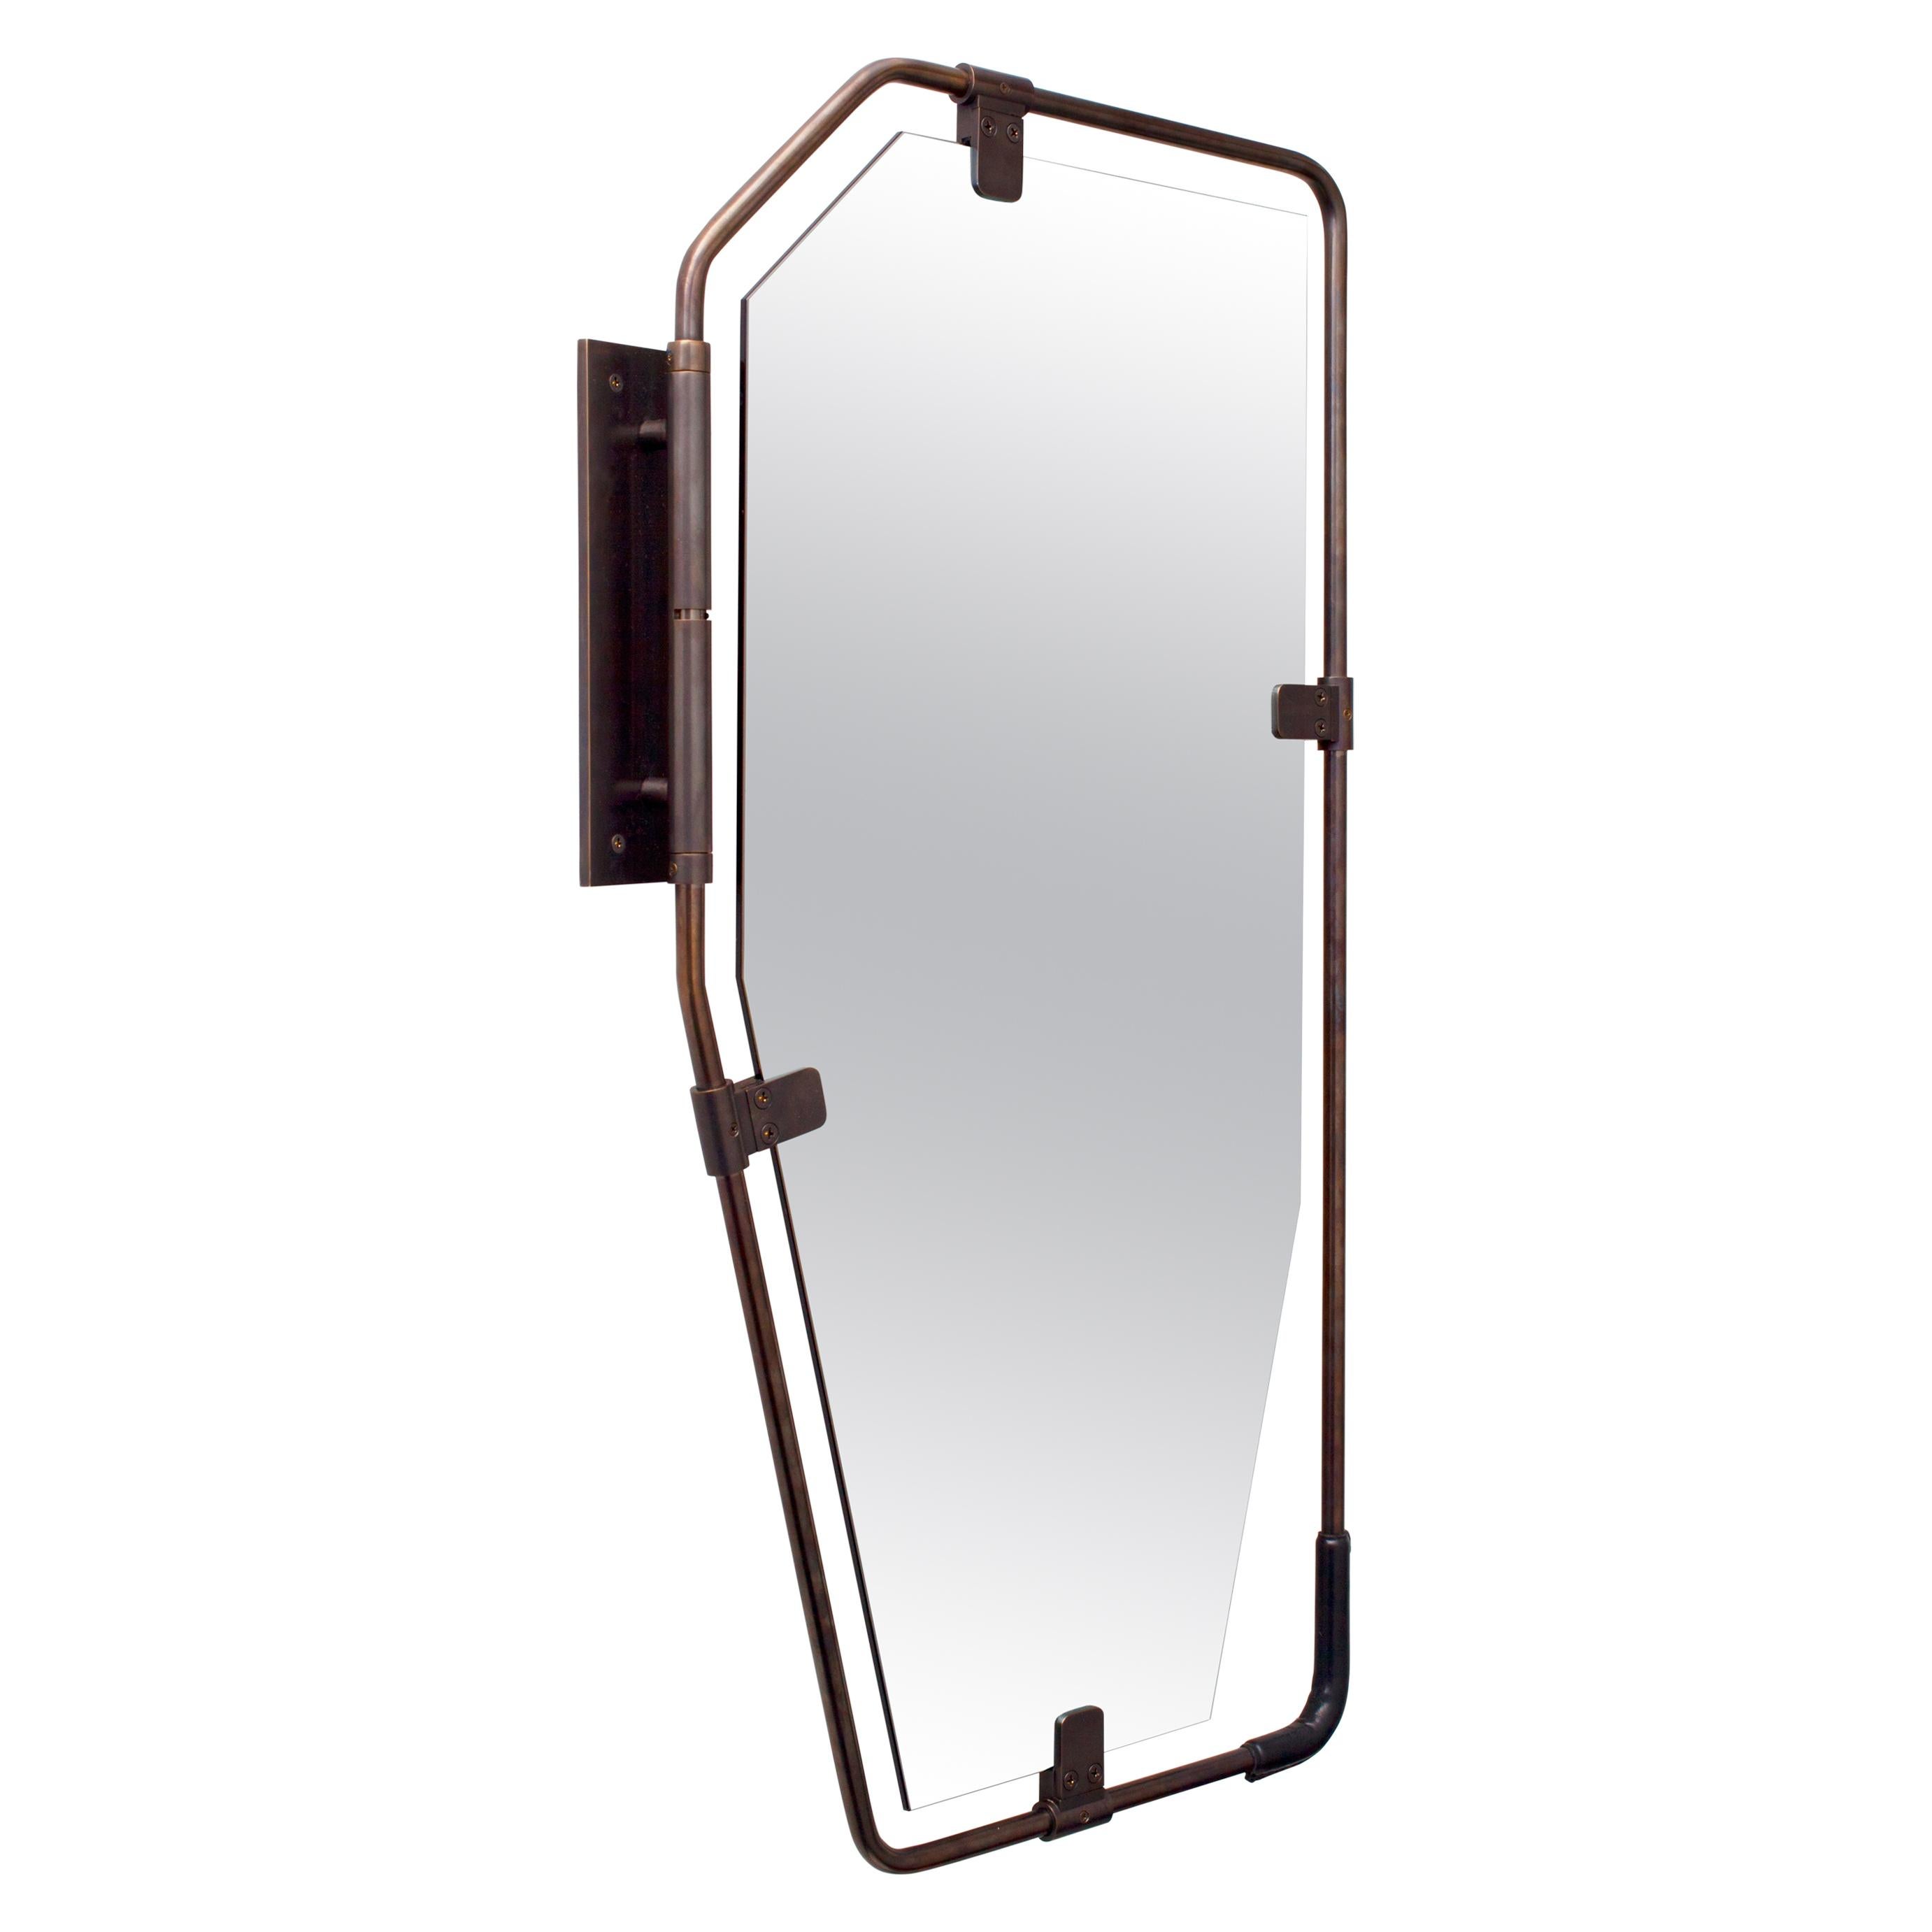 SWITCH Mirror - pivoting brass frame with leather grip For Sale